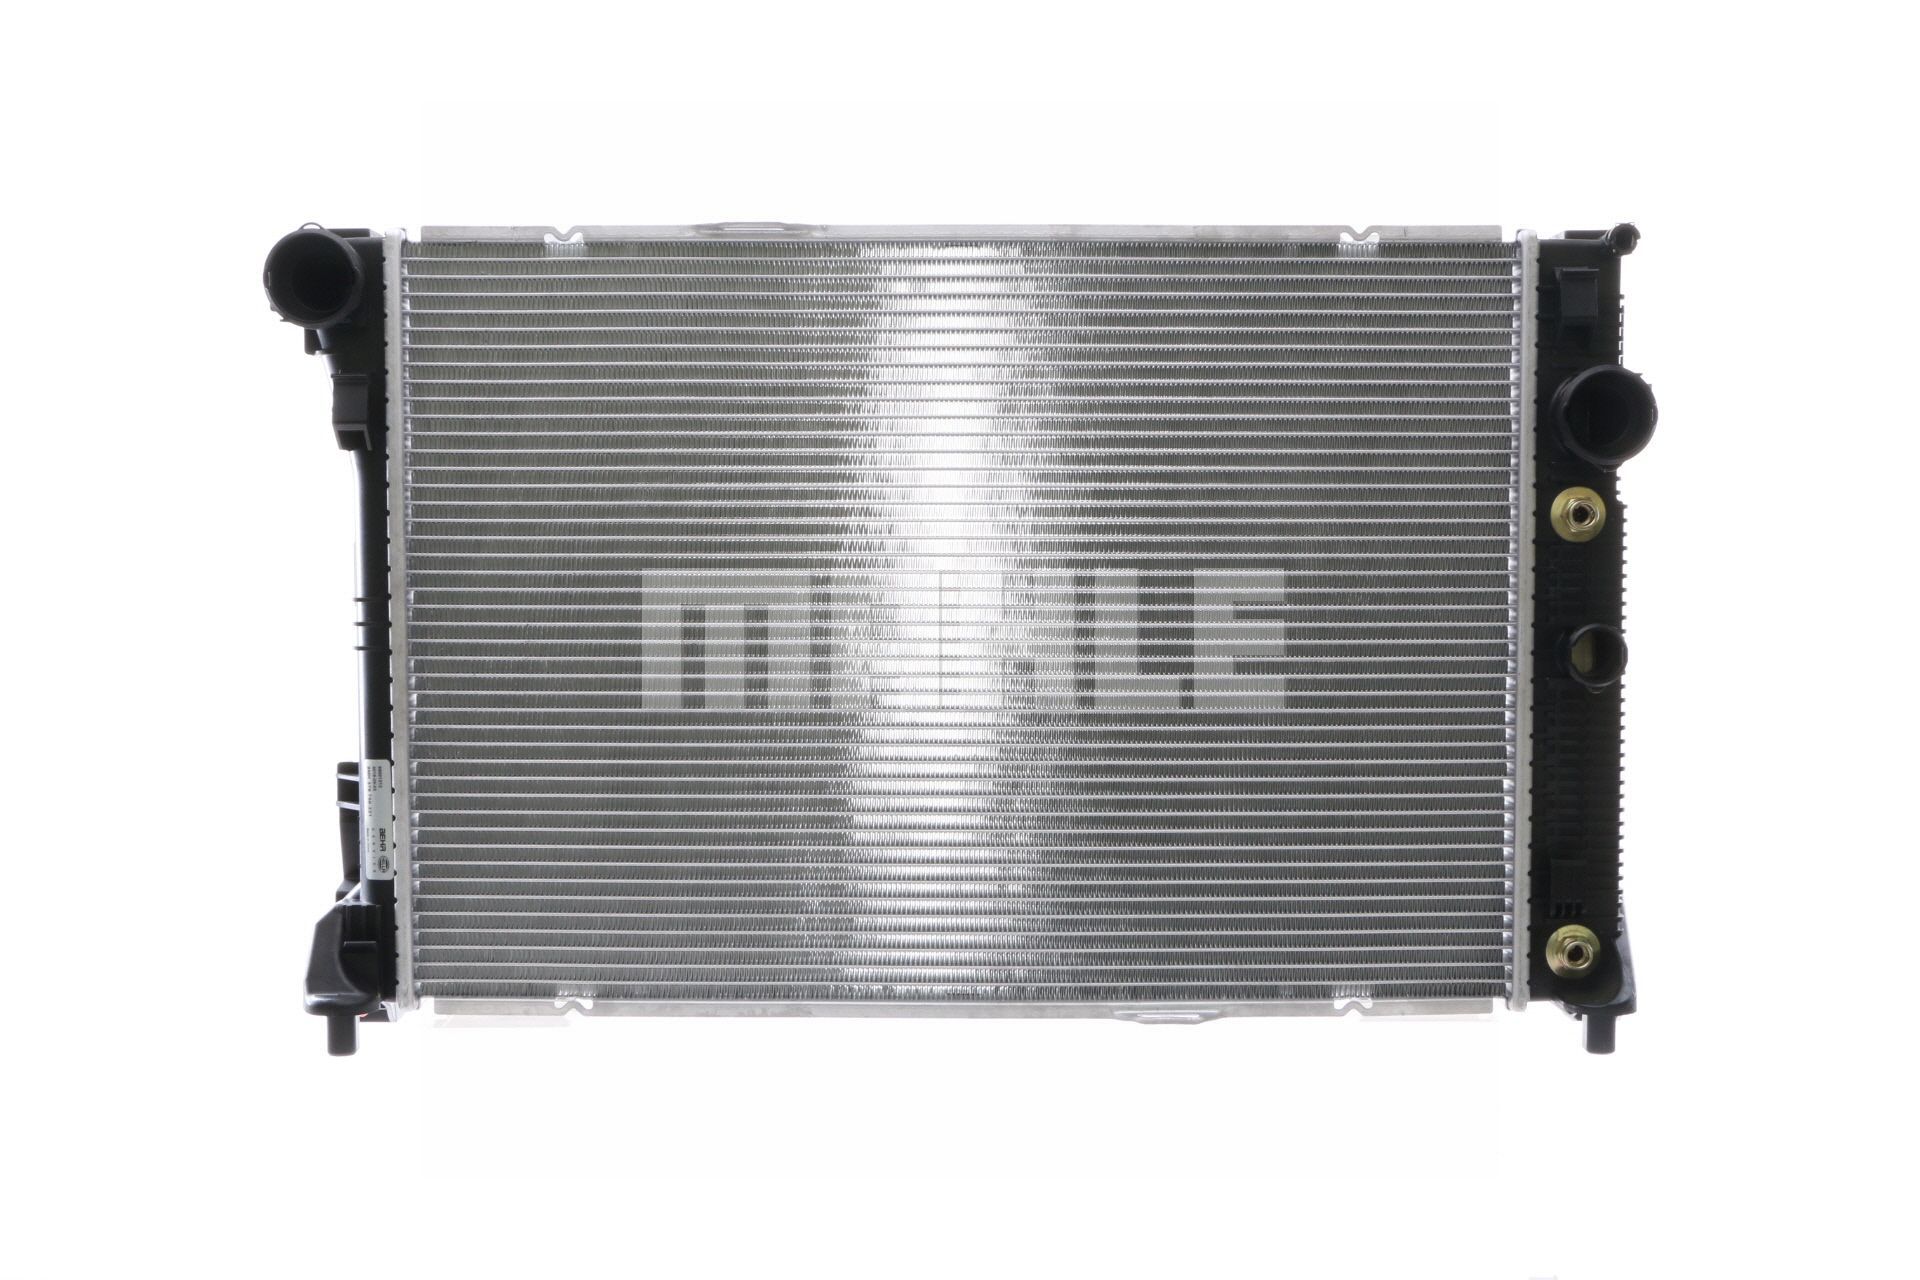 376756221 MAHLE ORIGINAL for vehicles with/without air conditioning, 640 x 440 x 33 mm, Brazed cooling fins Radiator CR 1176 000S buy